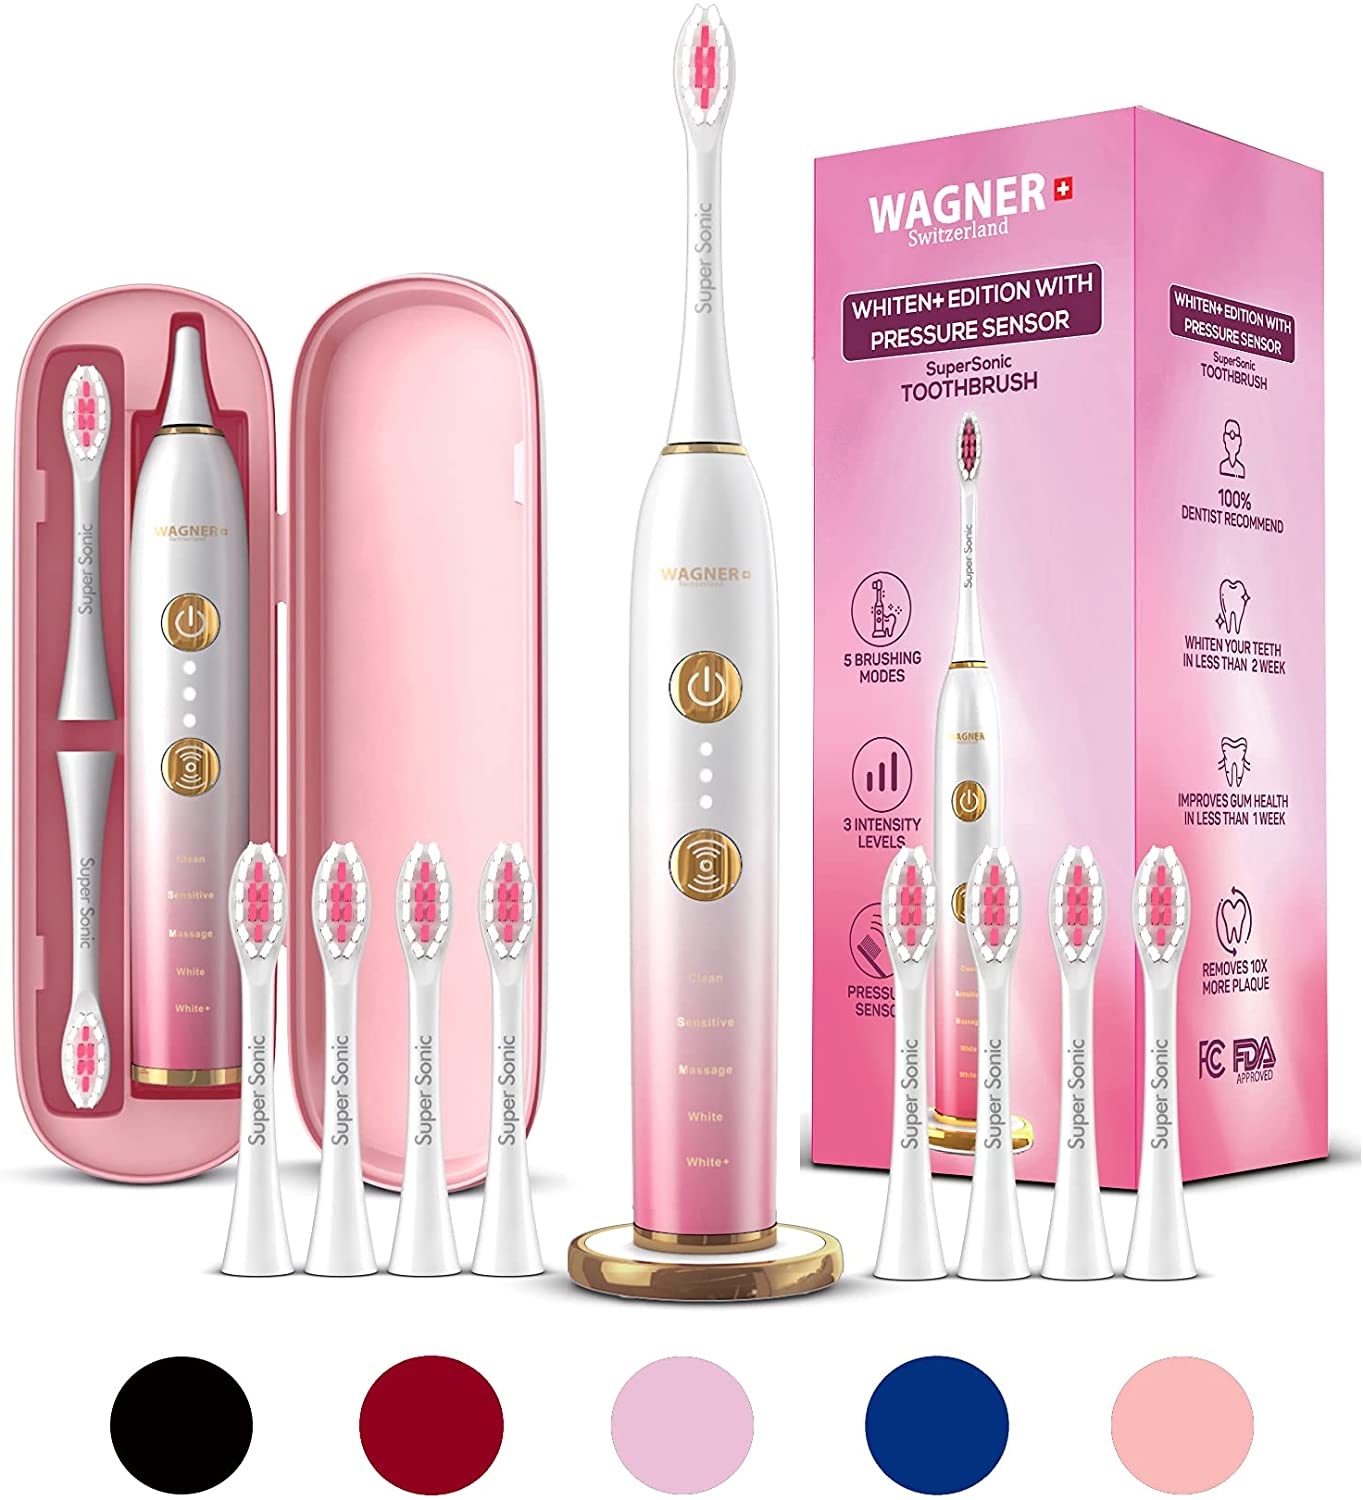 WAGNER Switzerland WHITEN+ Edition. Smart Electric Toothbrush with Pressure Sensor. 5 Brushing Modes and 3 Intensity Levels, 8 Dupont Bristles, Premium Travel Case. | Decor Gifts and More